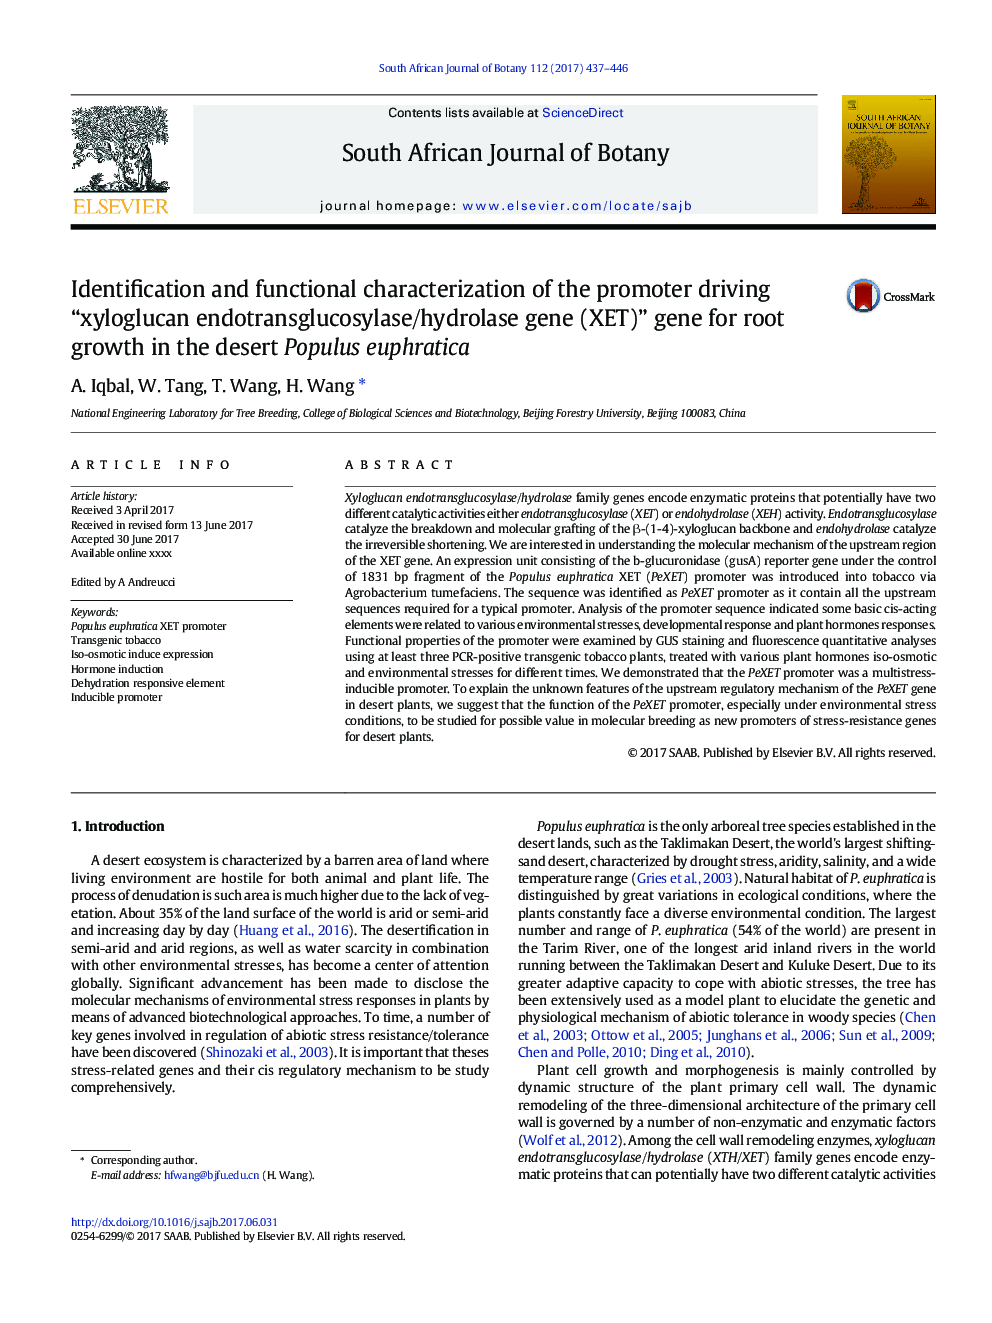 Identification and functional characterization of the promoter driving “xyloglucan endotransglucosylase/hydrolase gene (XET)” gene for root growth in the desert Populus euphratica